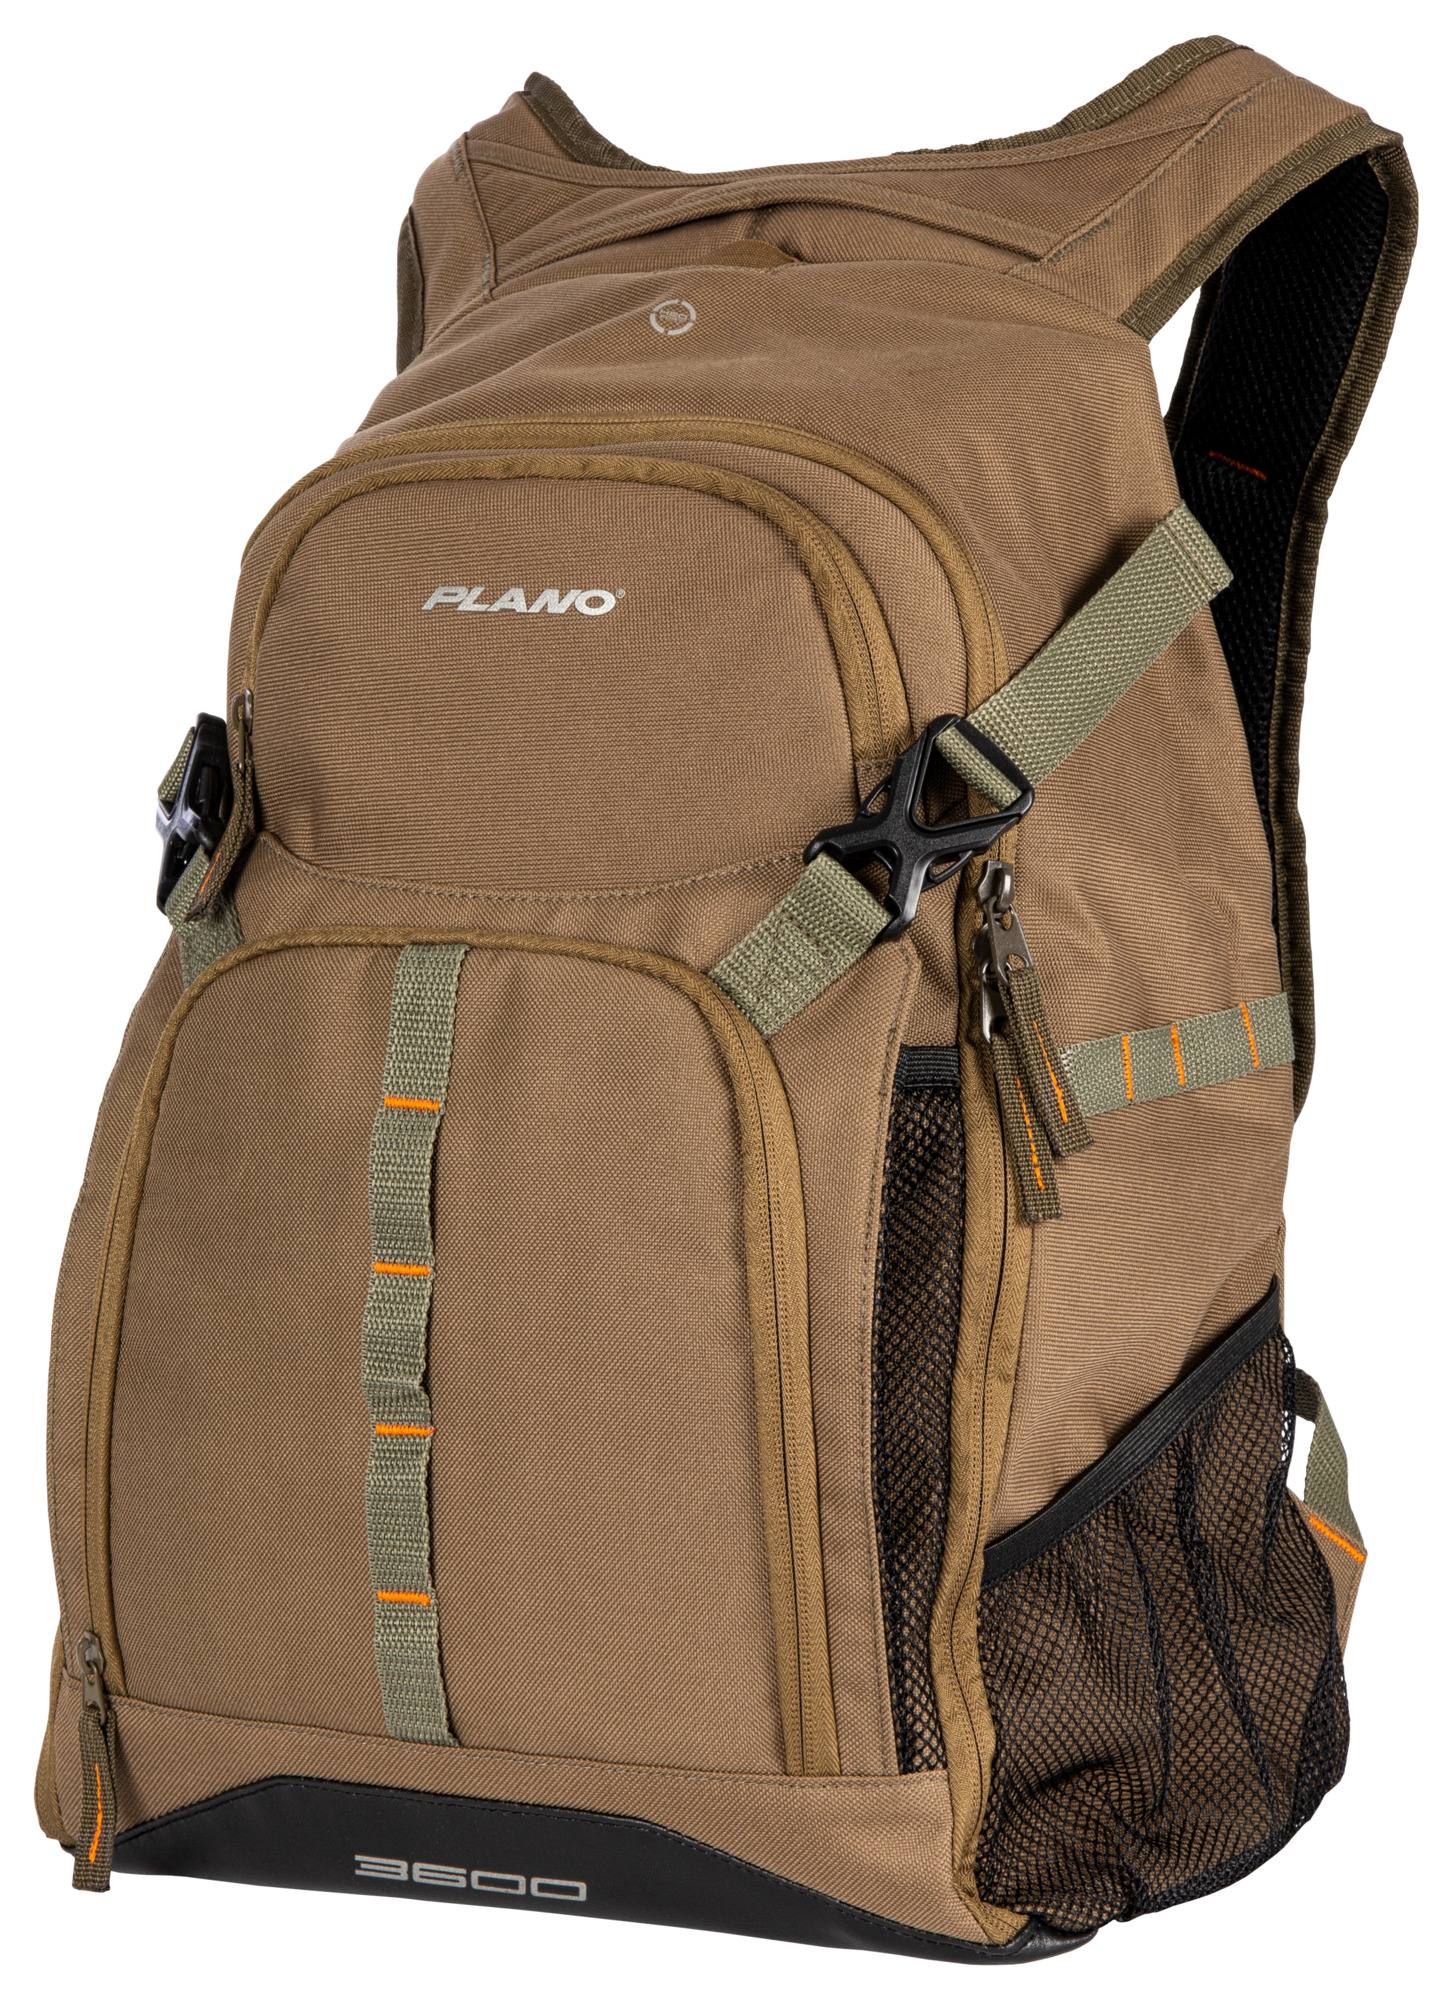 Plano PLABE621 ESeries Olive Backpack  Includes Three 3600 | 024099006613